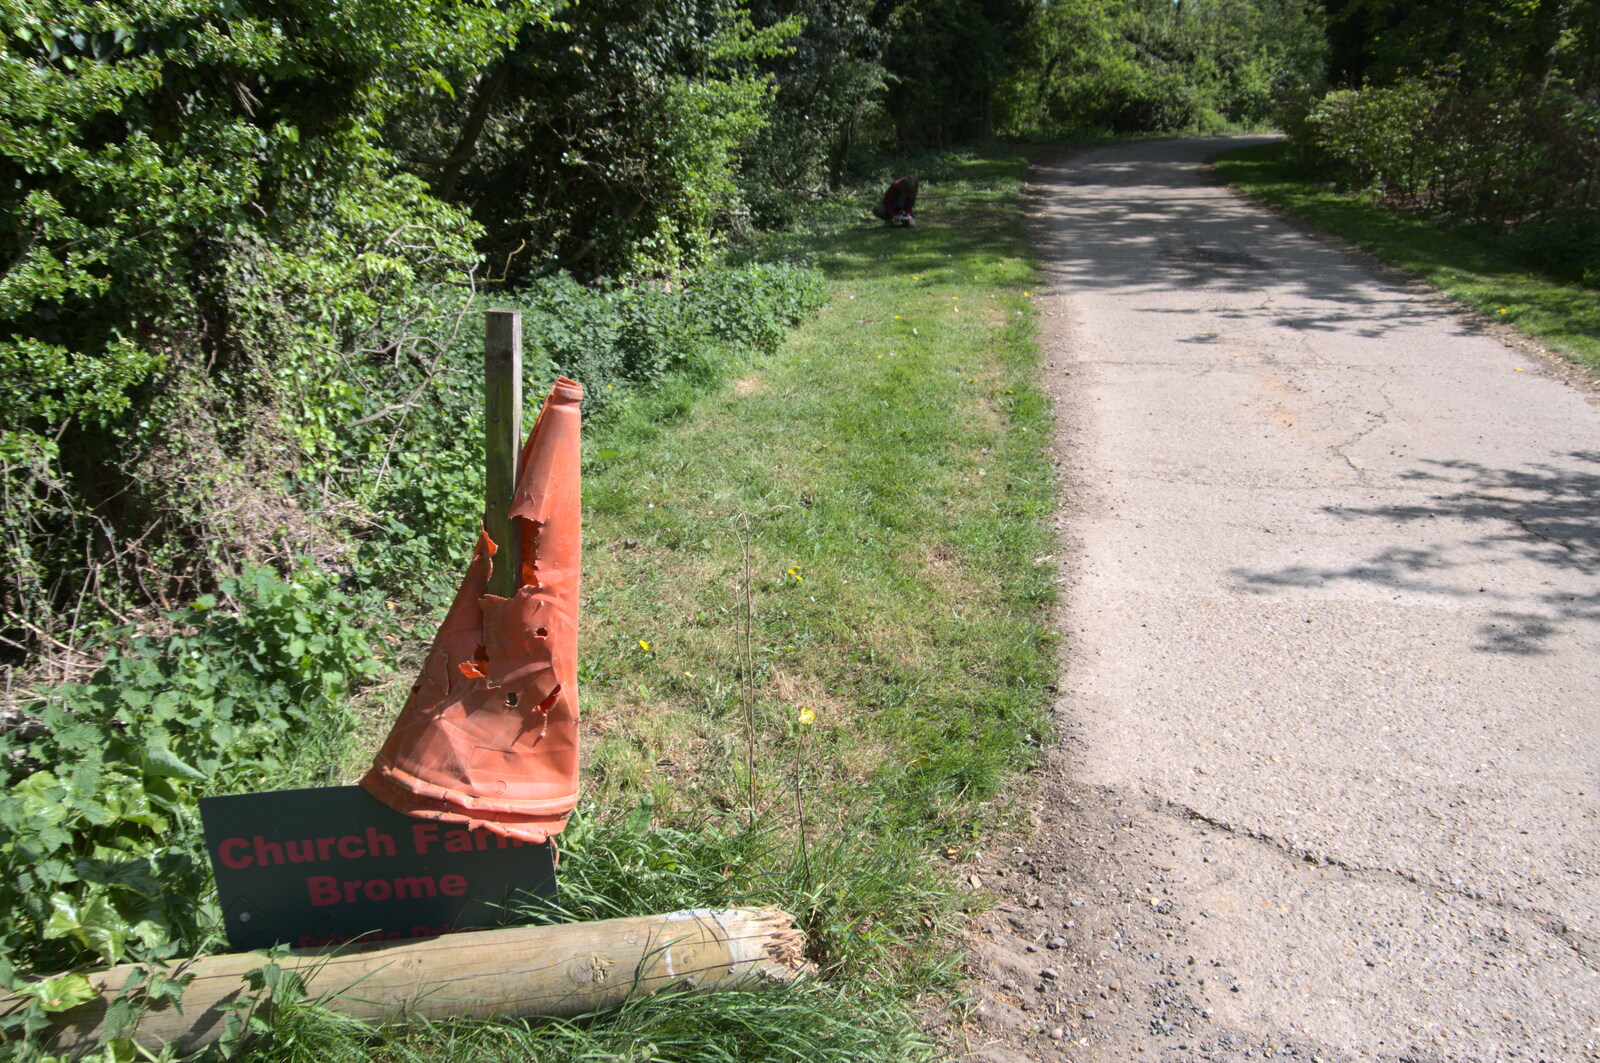 A dead traffic cone at Church Farm from Lost Cat and a Walk on Nick's Lane, Brome, Suffolk - 26th April 2020